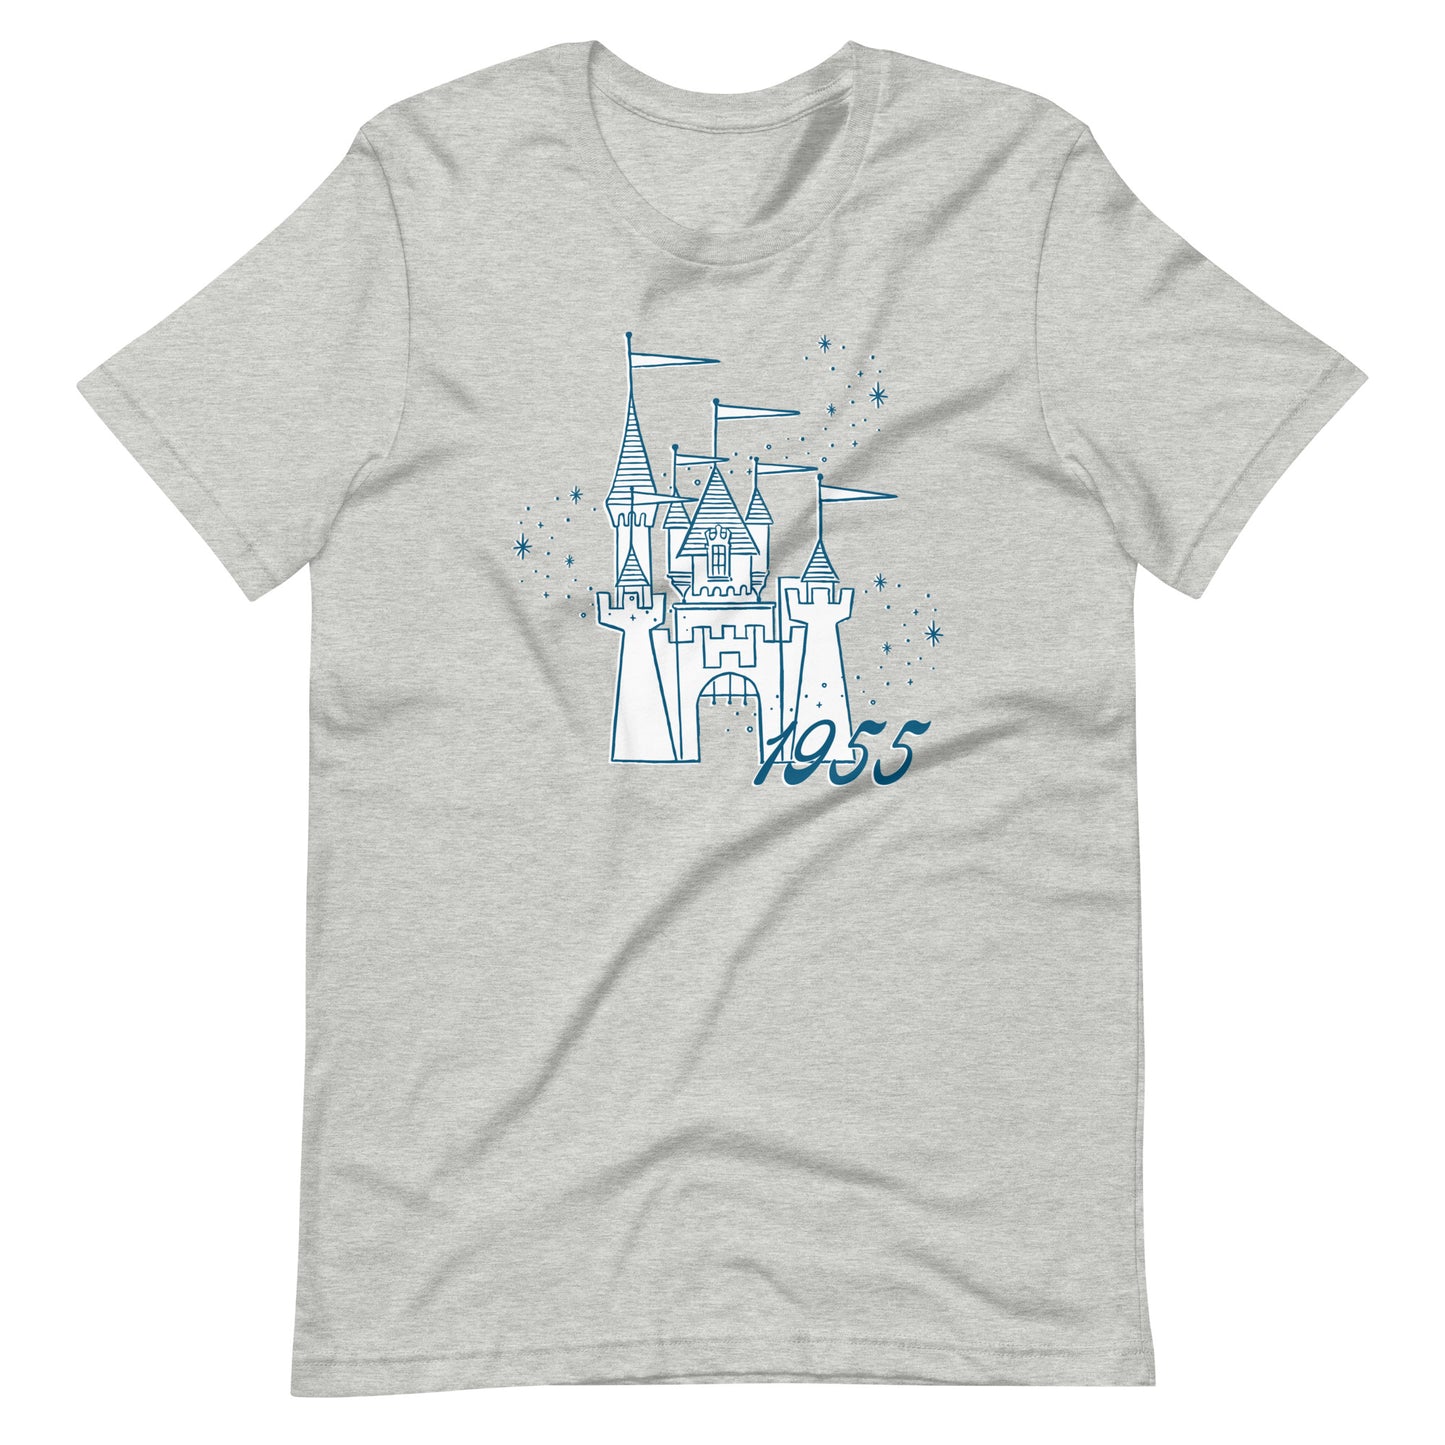 Gray shirt printed with vintage style sketch of a castle, the year 1955, and pixie dust above the castle.